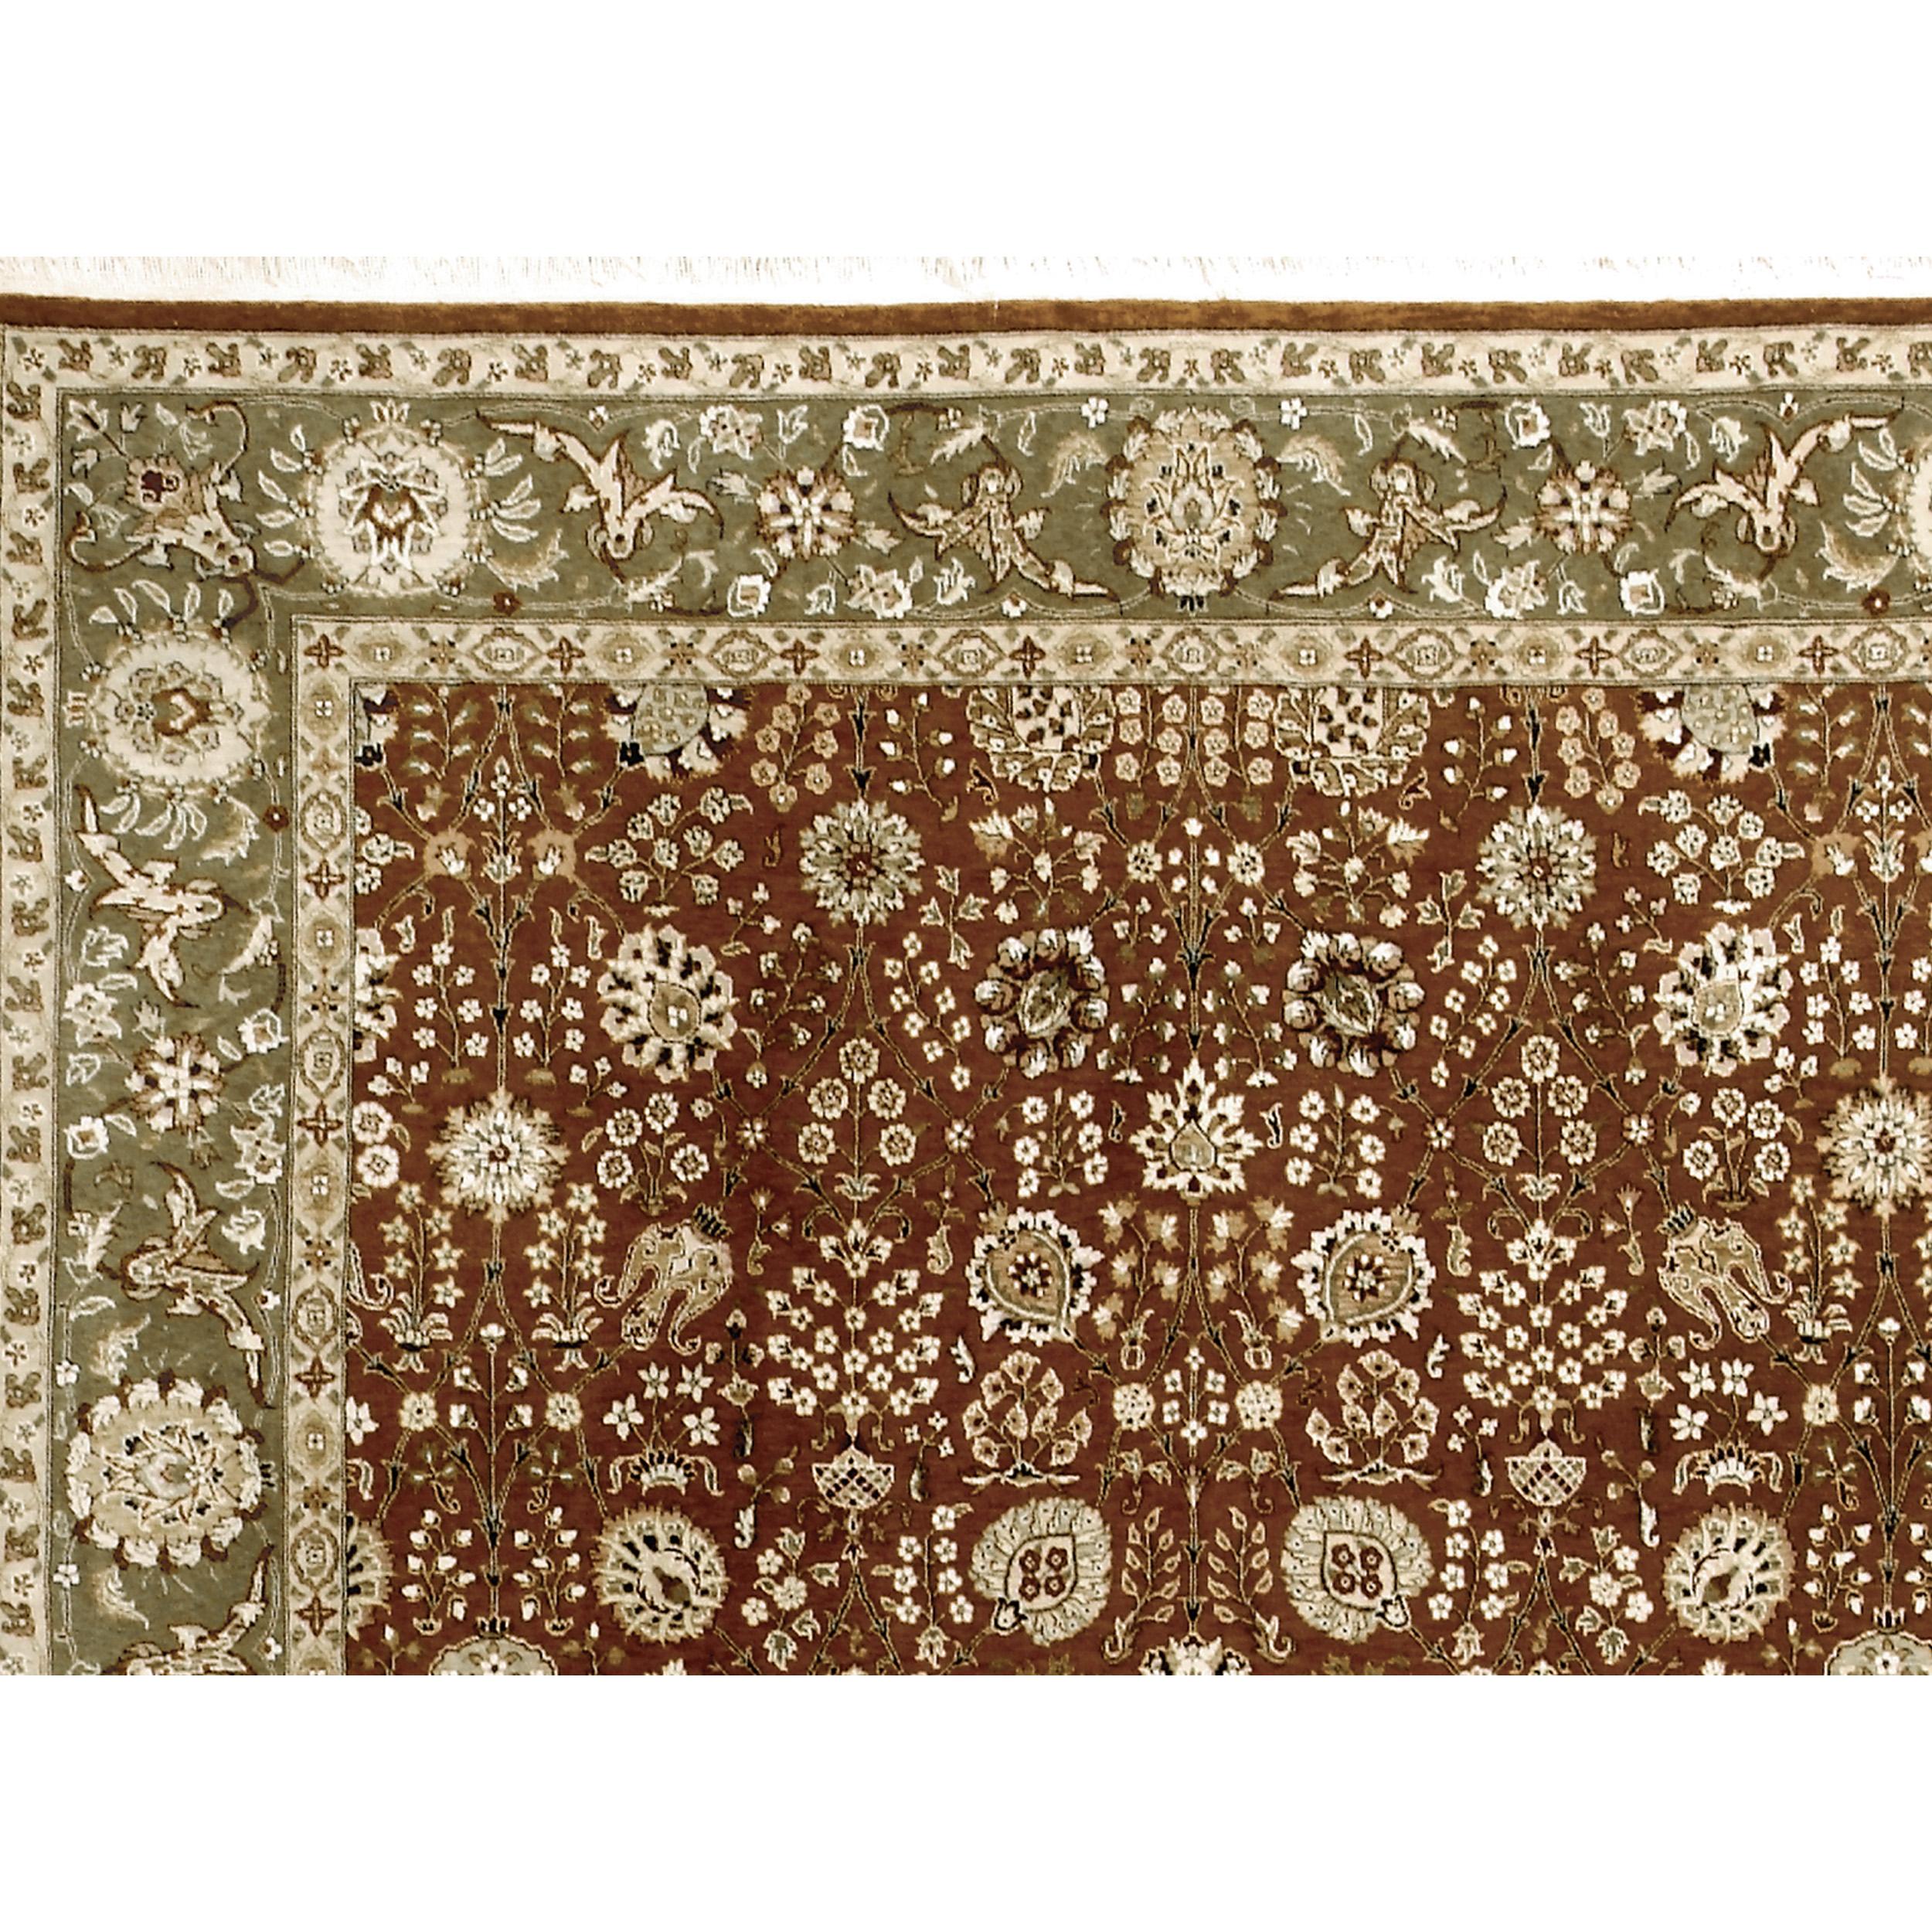 This rug deisgn is based on antique Persian rug designs, but using a contemporary color palette. The main characteristic of this rug is the noticeable abrash (color change), a new technique of weaving between two color hues, imparts an antique look.